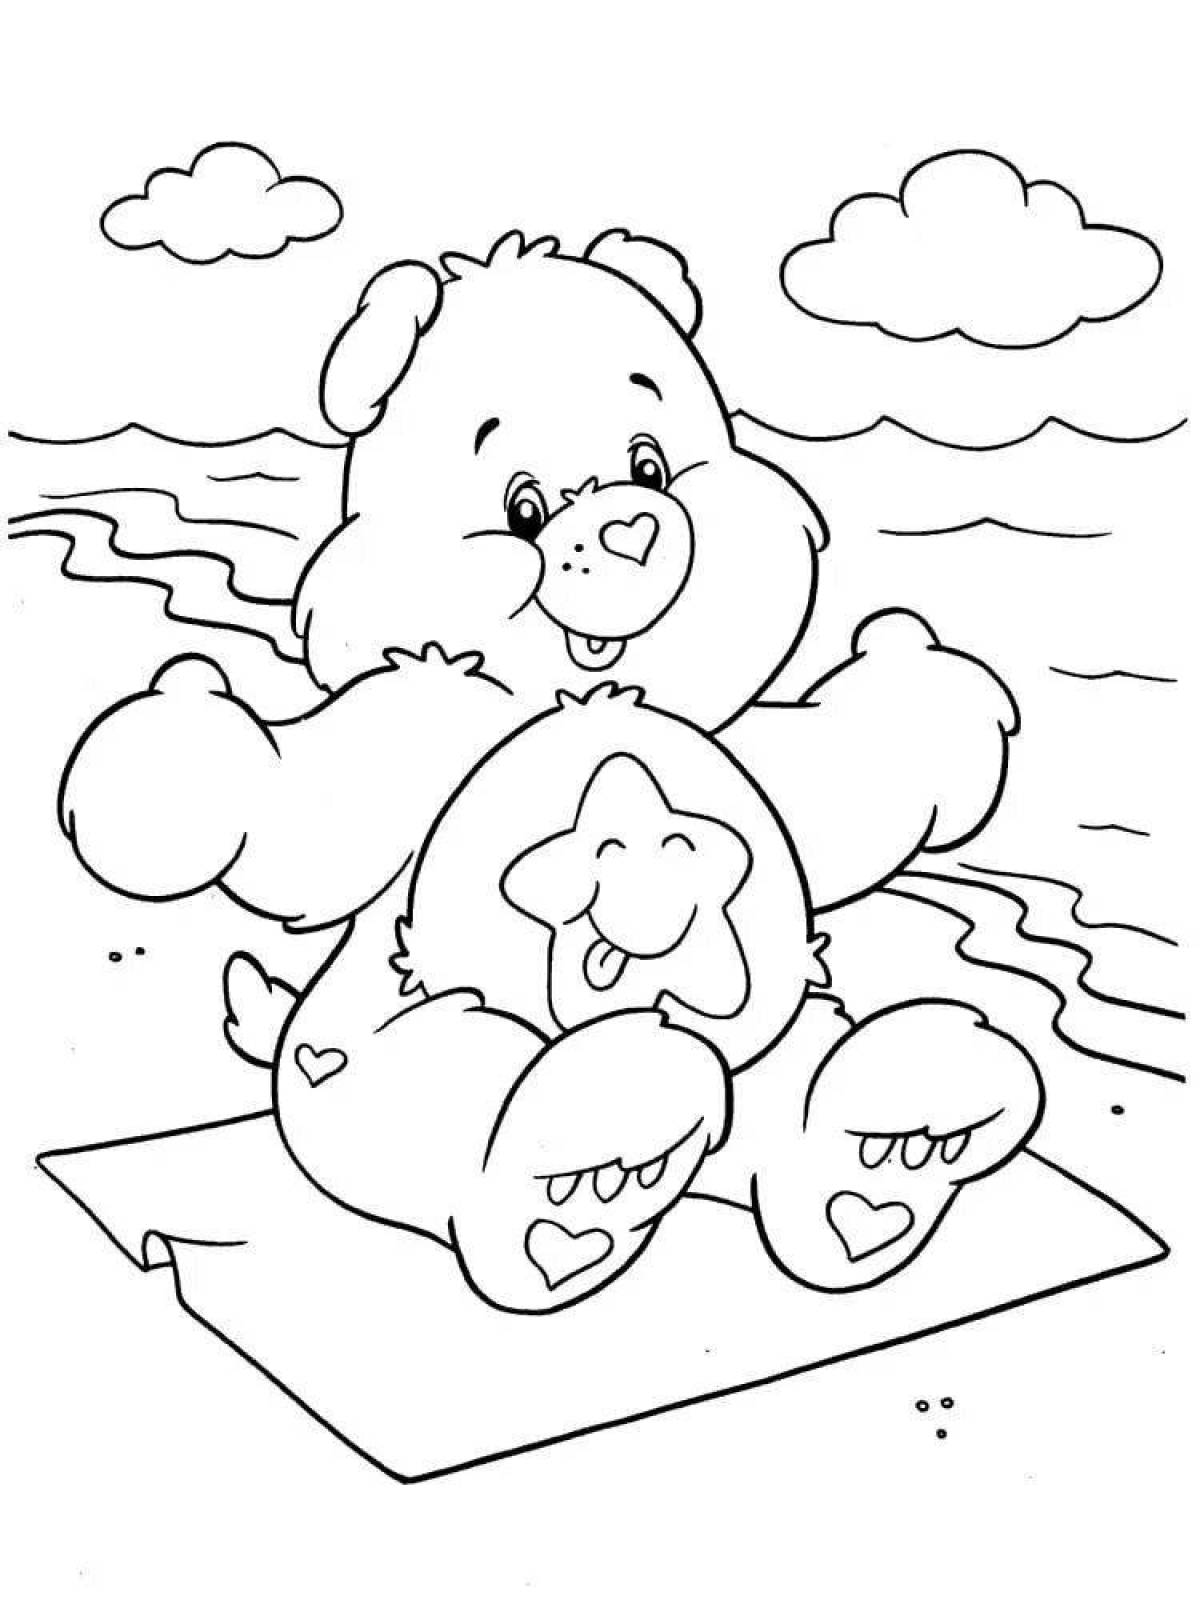 Friendly care bears coloring page